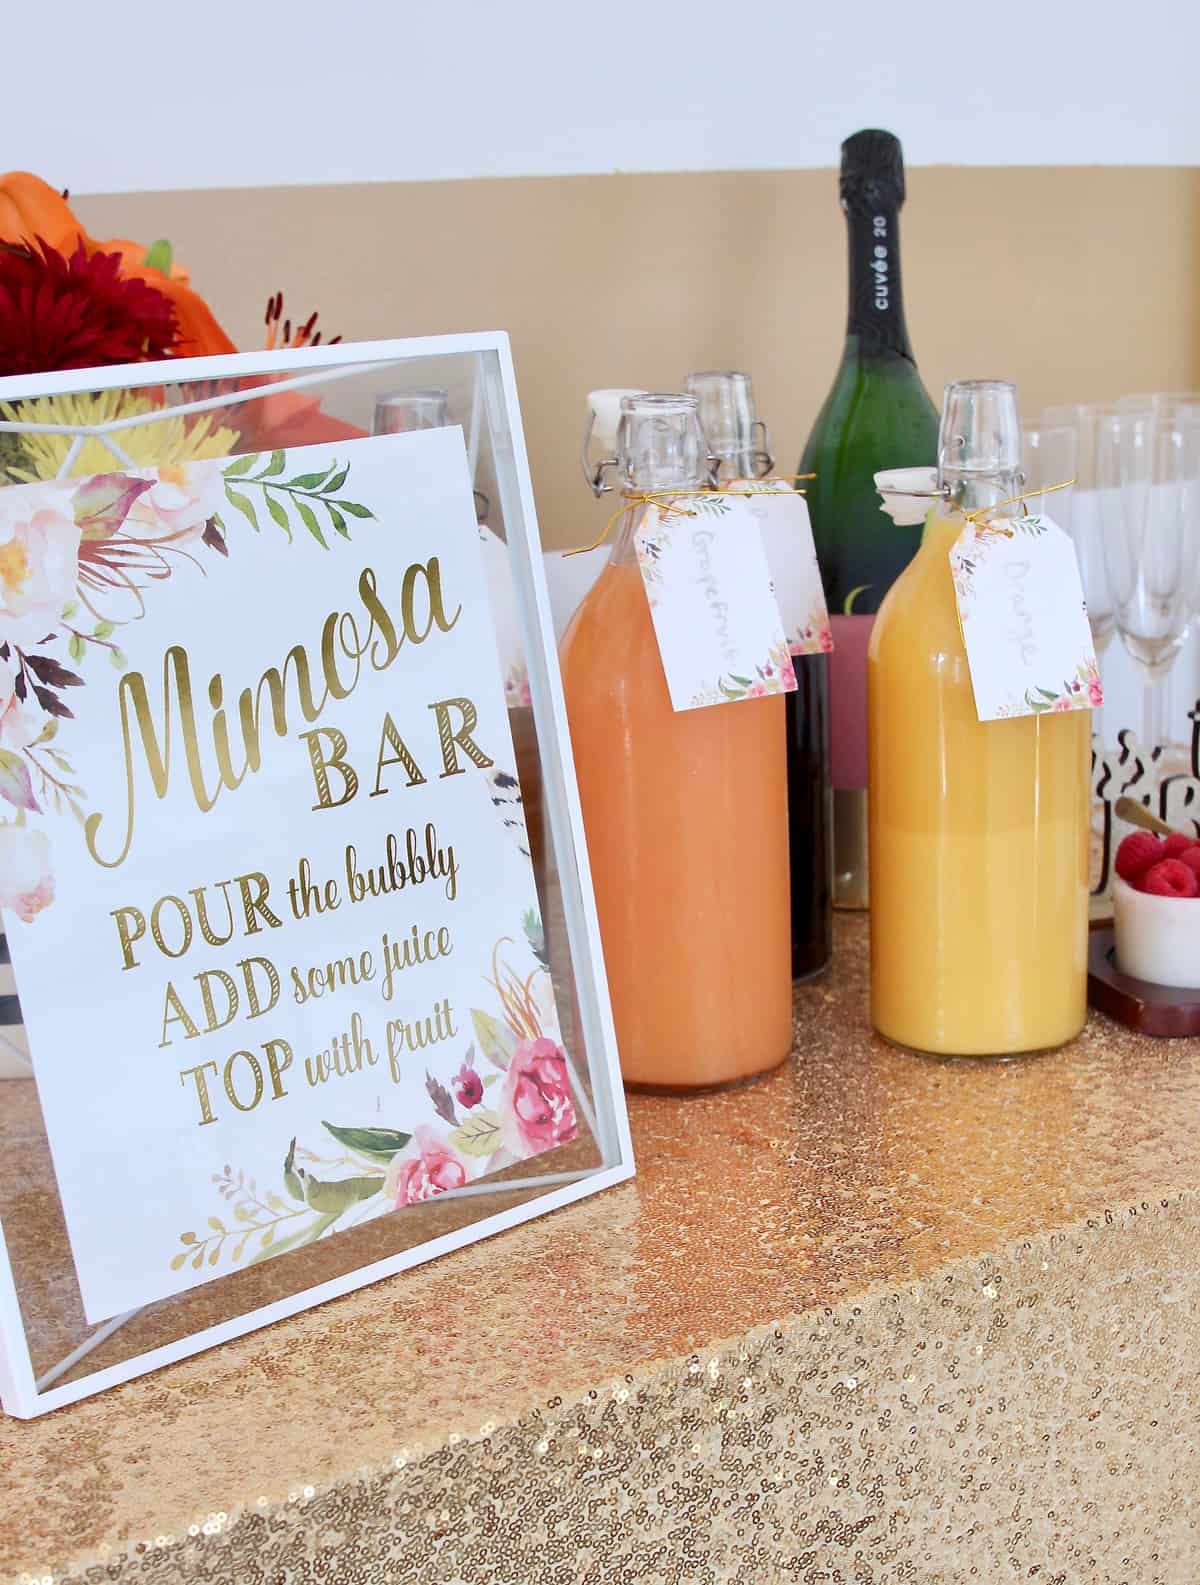 Mimosa bar sign and juices on bar with gold sparkly tablecloth